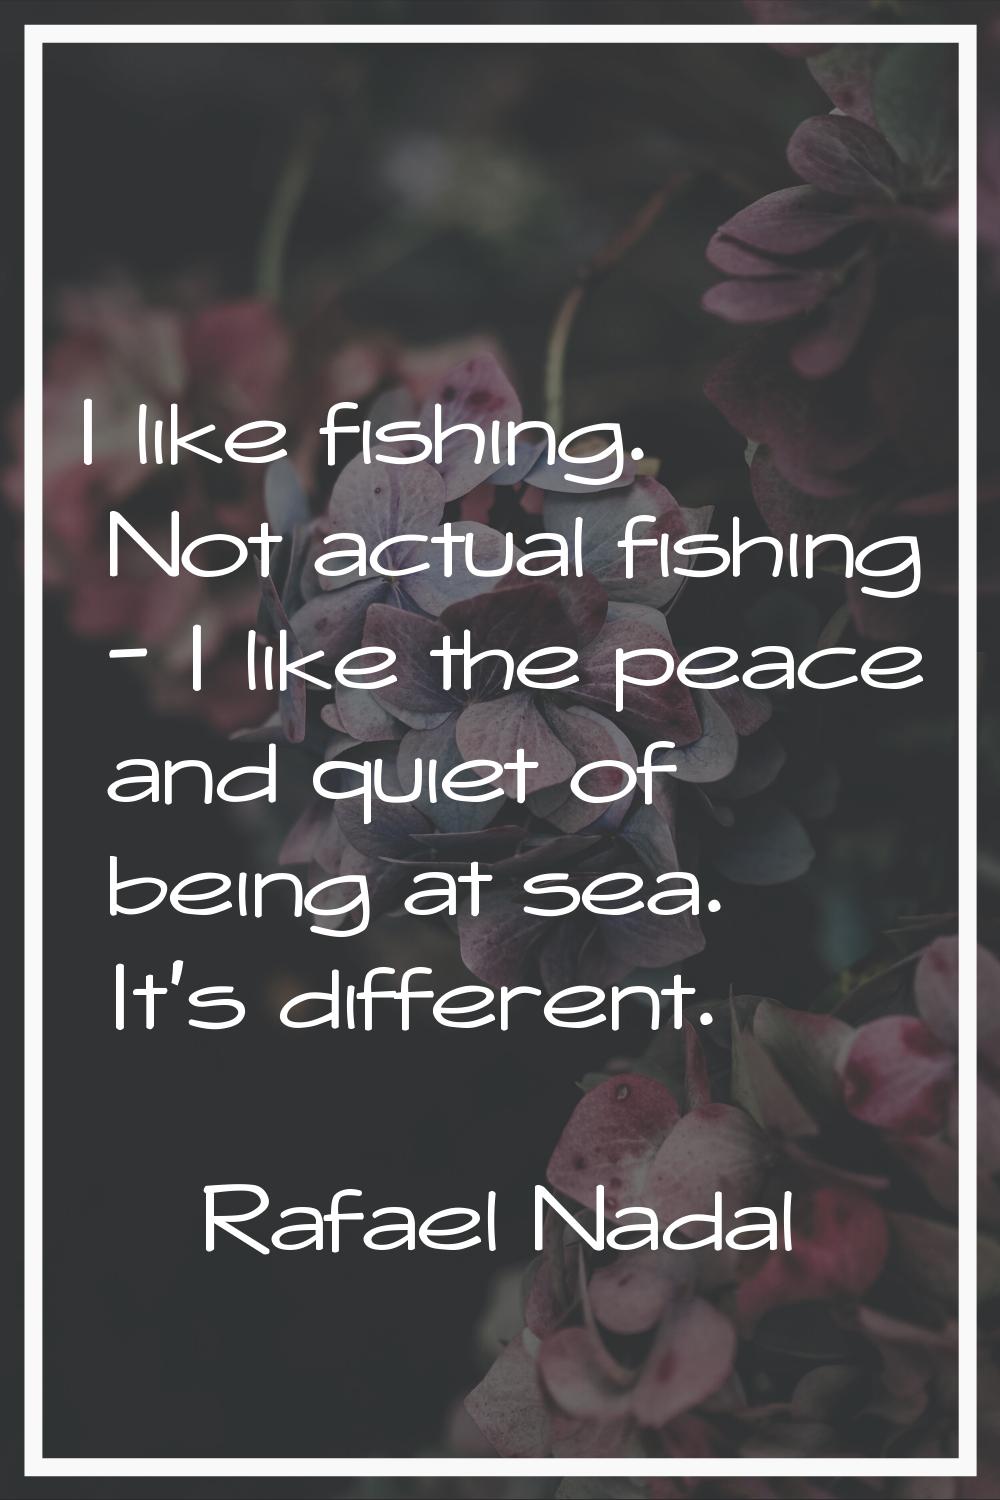 I like fishing. Not actual fishing - I like the peace and quiet of being at sea. It's different.